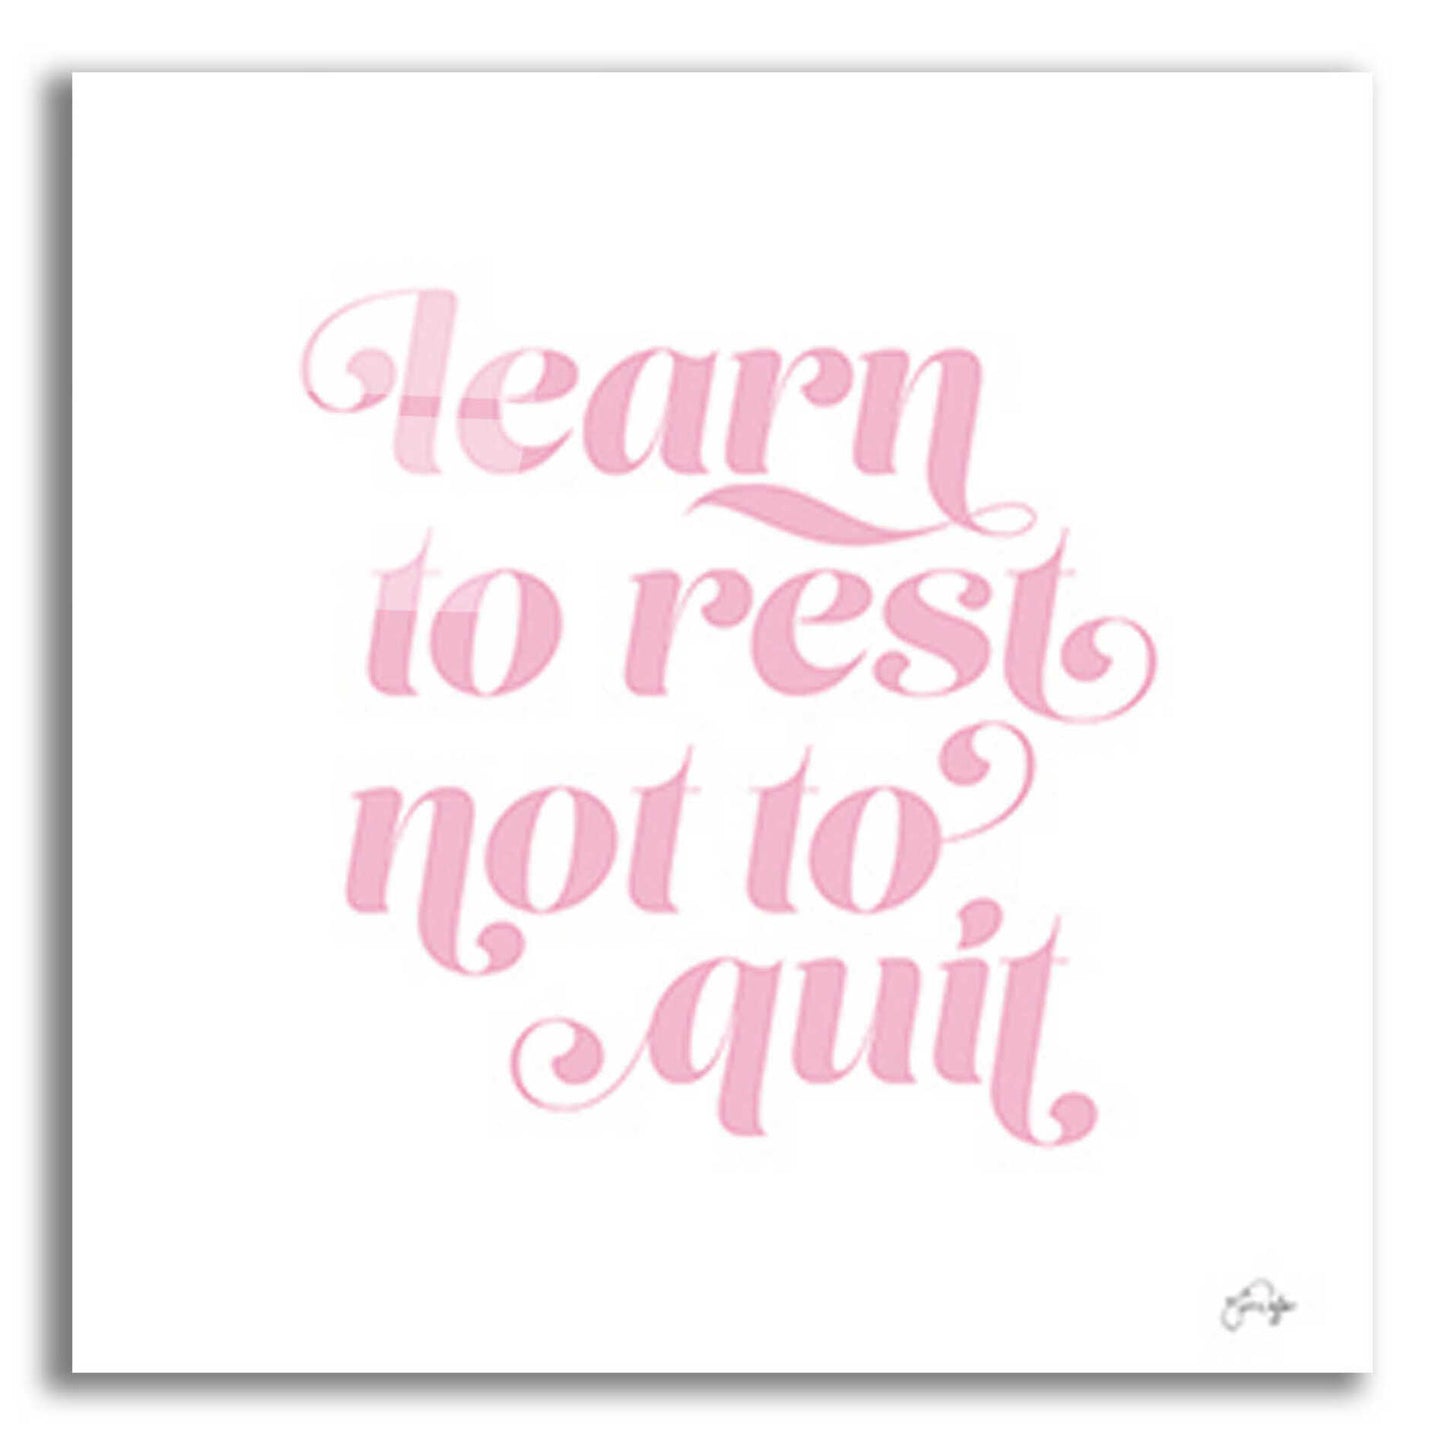 Epic Art 'Learn to Rest - Not to Quit' by Yass Naffas Designs, Acrylic Glass Wall Art,12x12